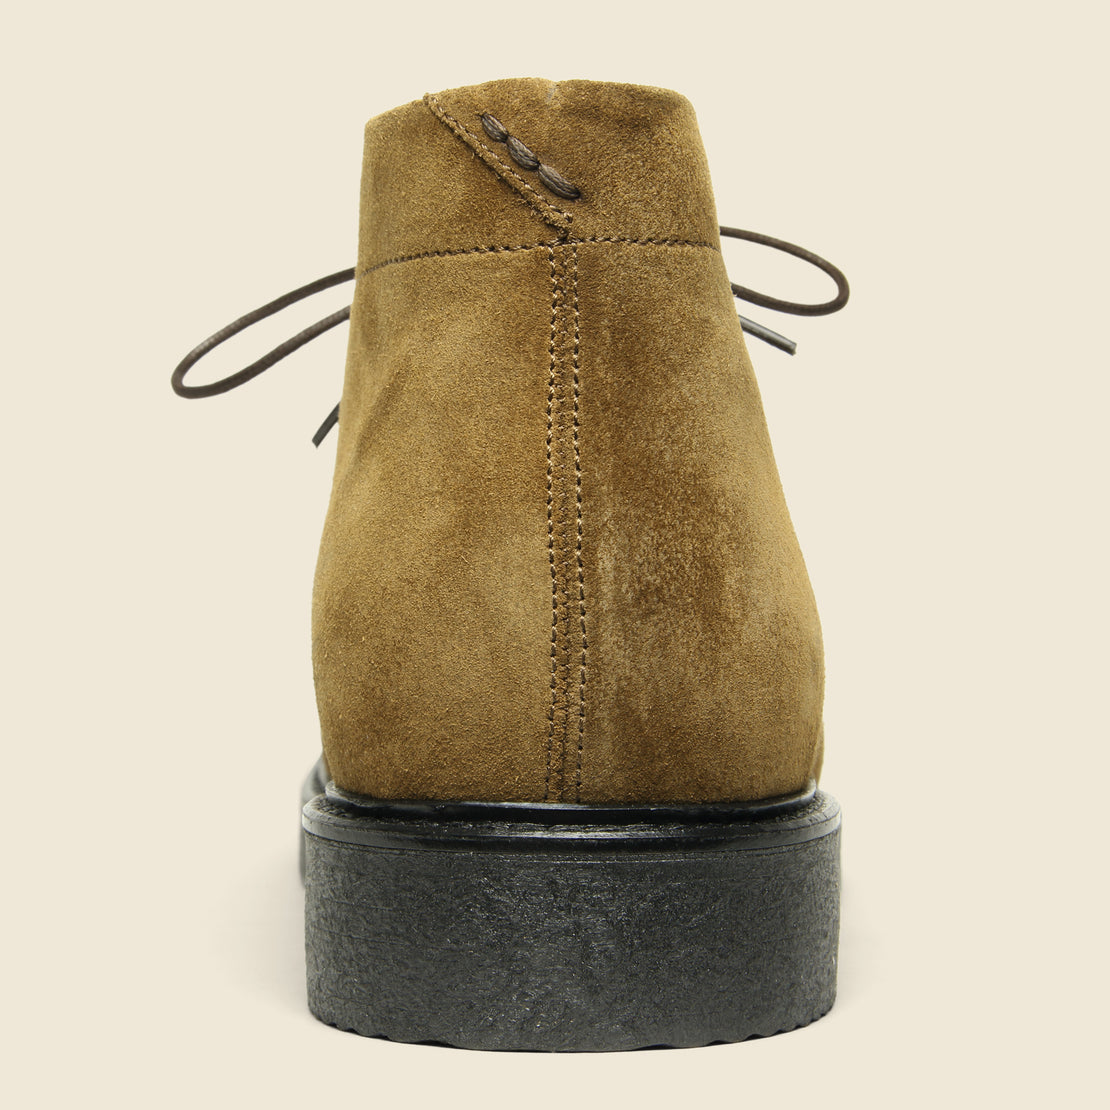 Hardy Suede Chukka - Tobacco - Shoe the Bear - STAG Provisions - Shoes - Boots / Chukkas